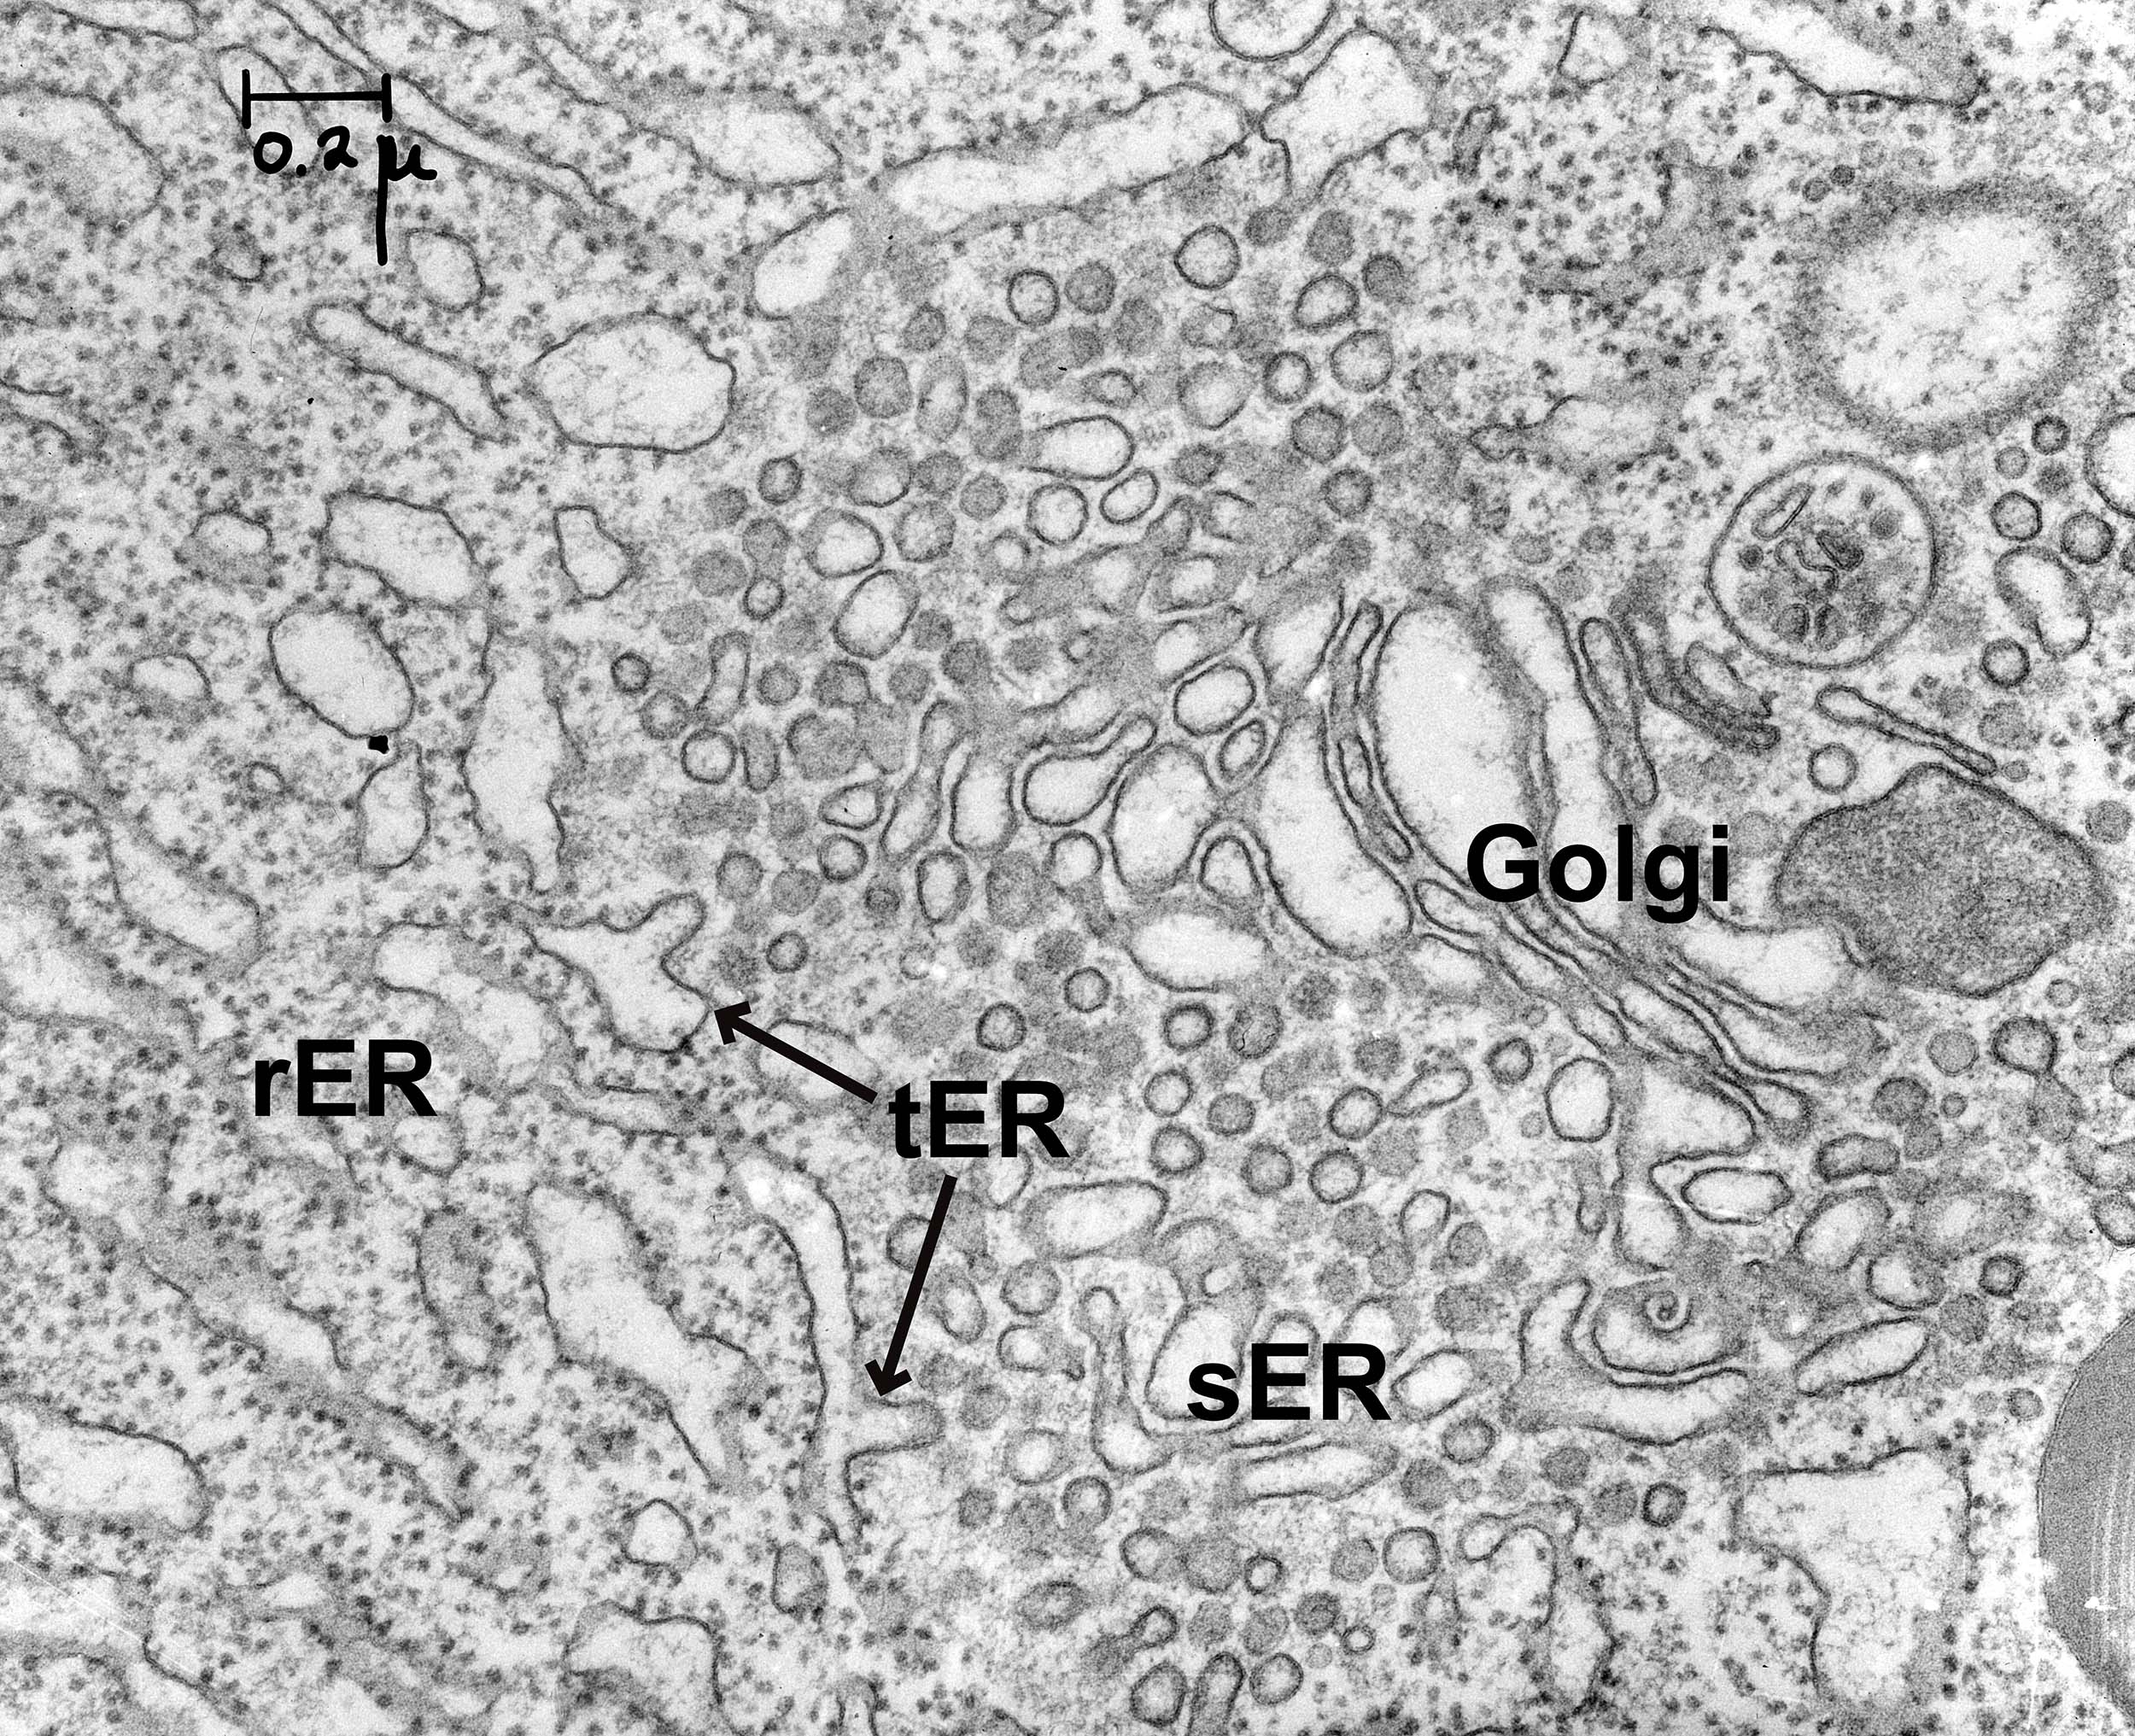 Electron micrograph of the rough and smooth ER along with the Golgi